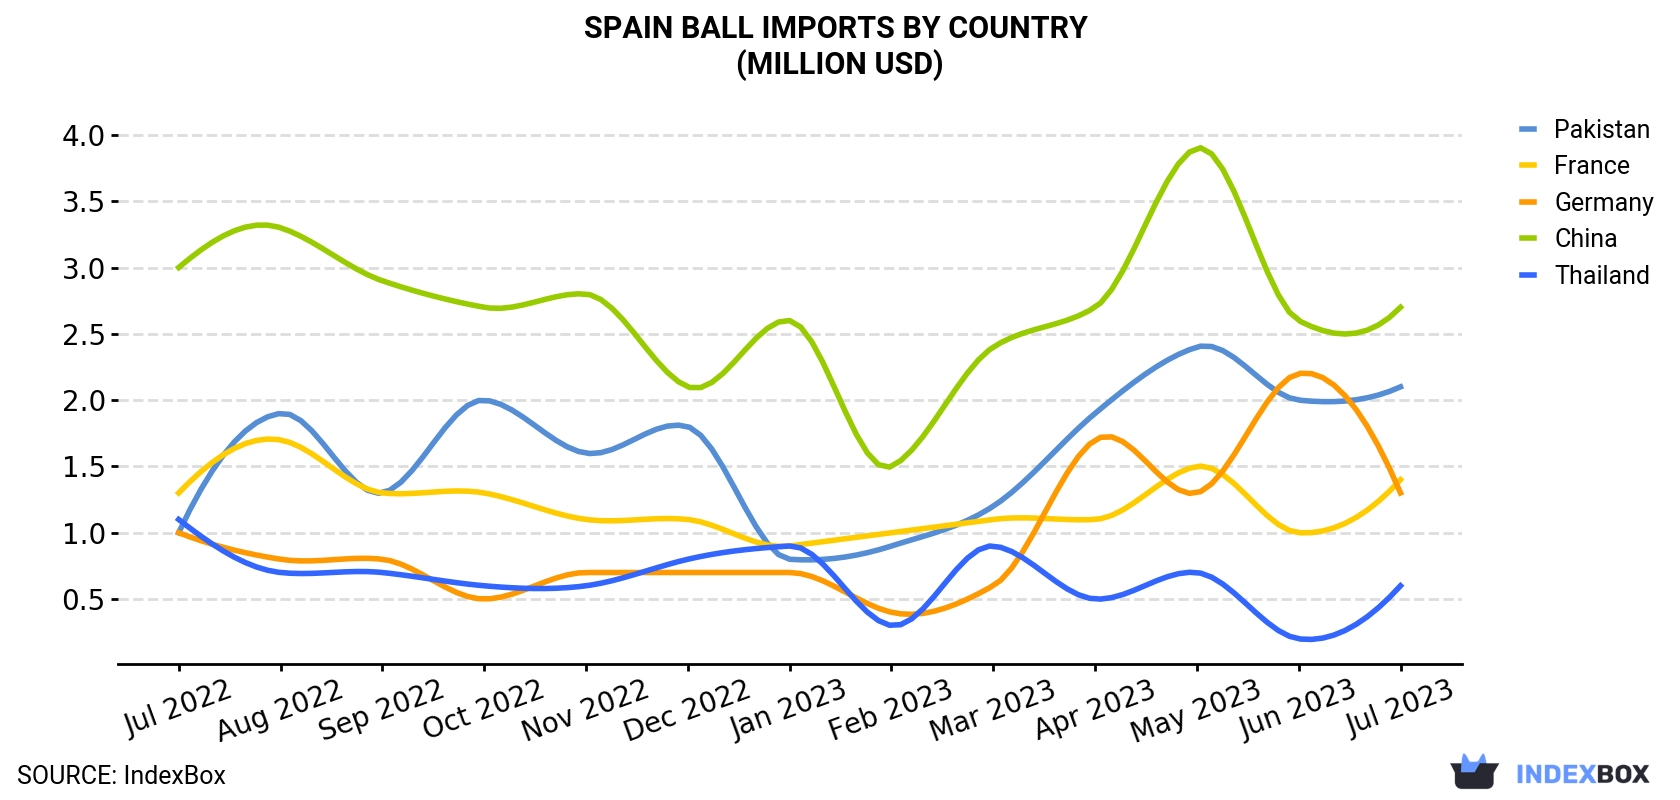 Spain Ball Imports By Country (Million USD)